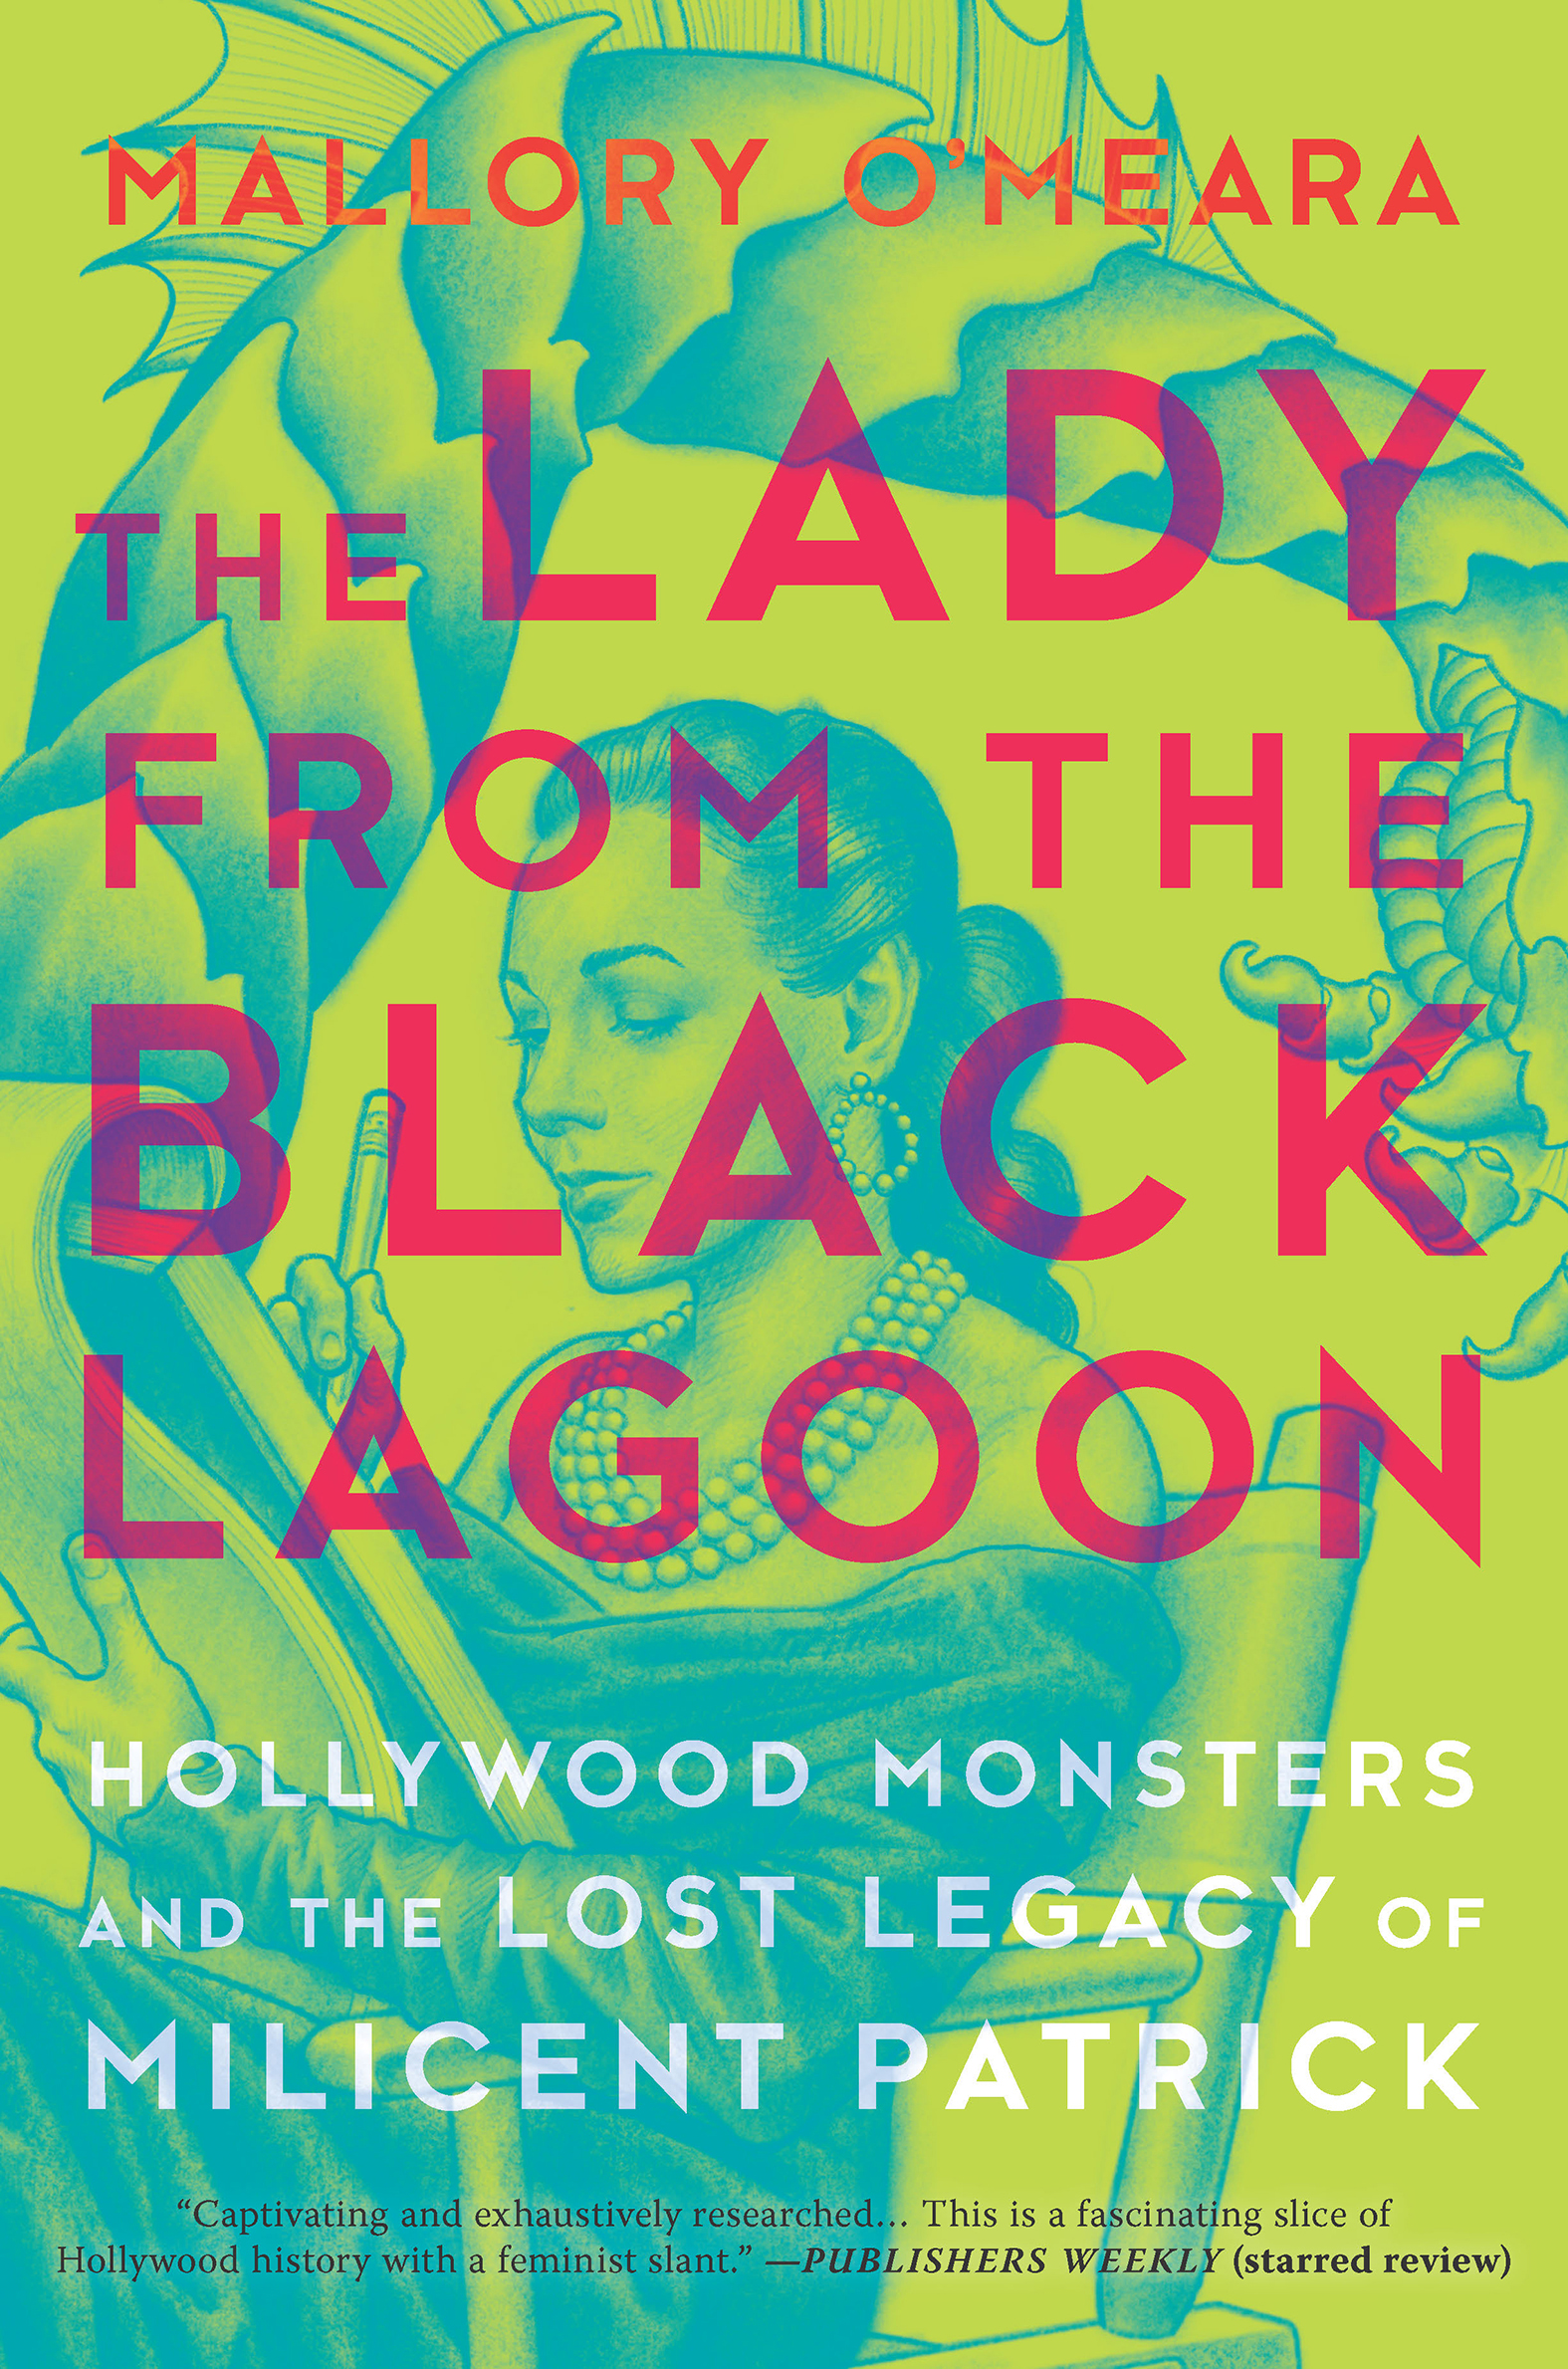 Imagen de portada para The Lady from the Black Lagoon [electronic resource] : Hollywood Monsters and the Lost Legacy of Milicent Patrick